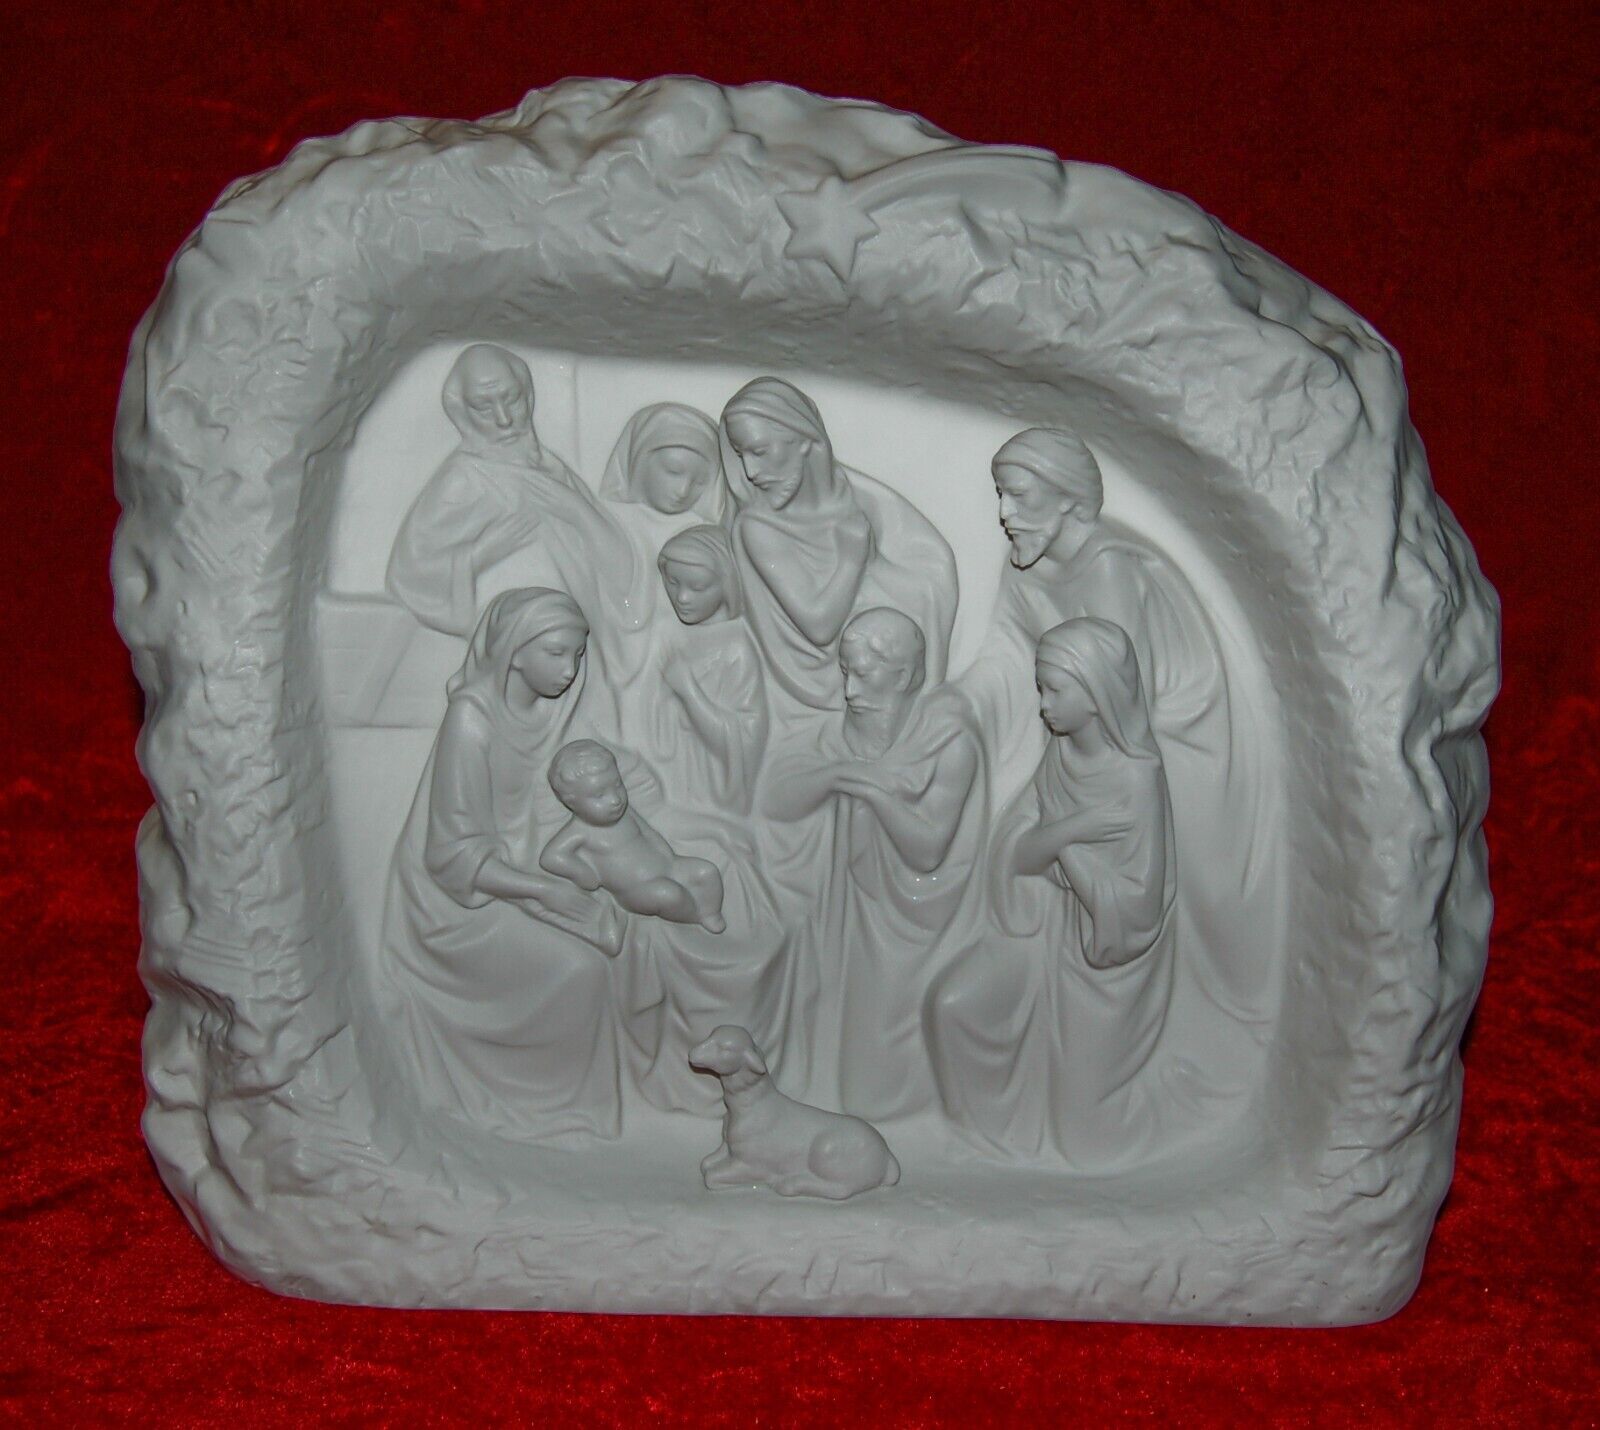 LLADRO Porcelain NATIVITY BAS RELIEF #15281 1985 Made in Spain LARGE VERY RARE